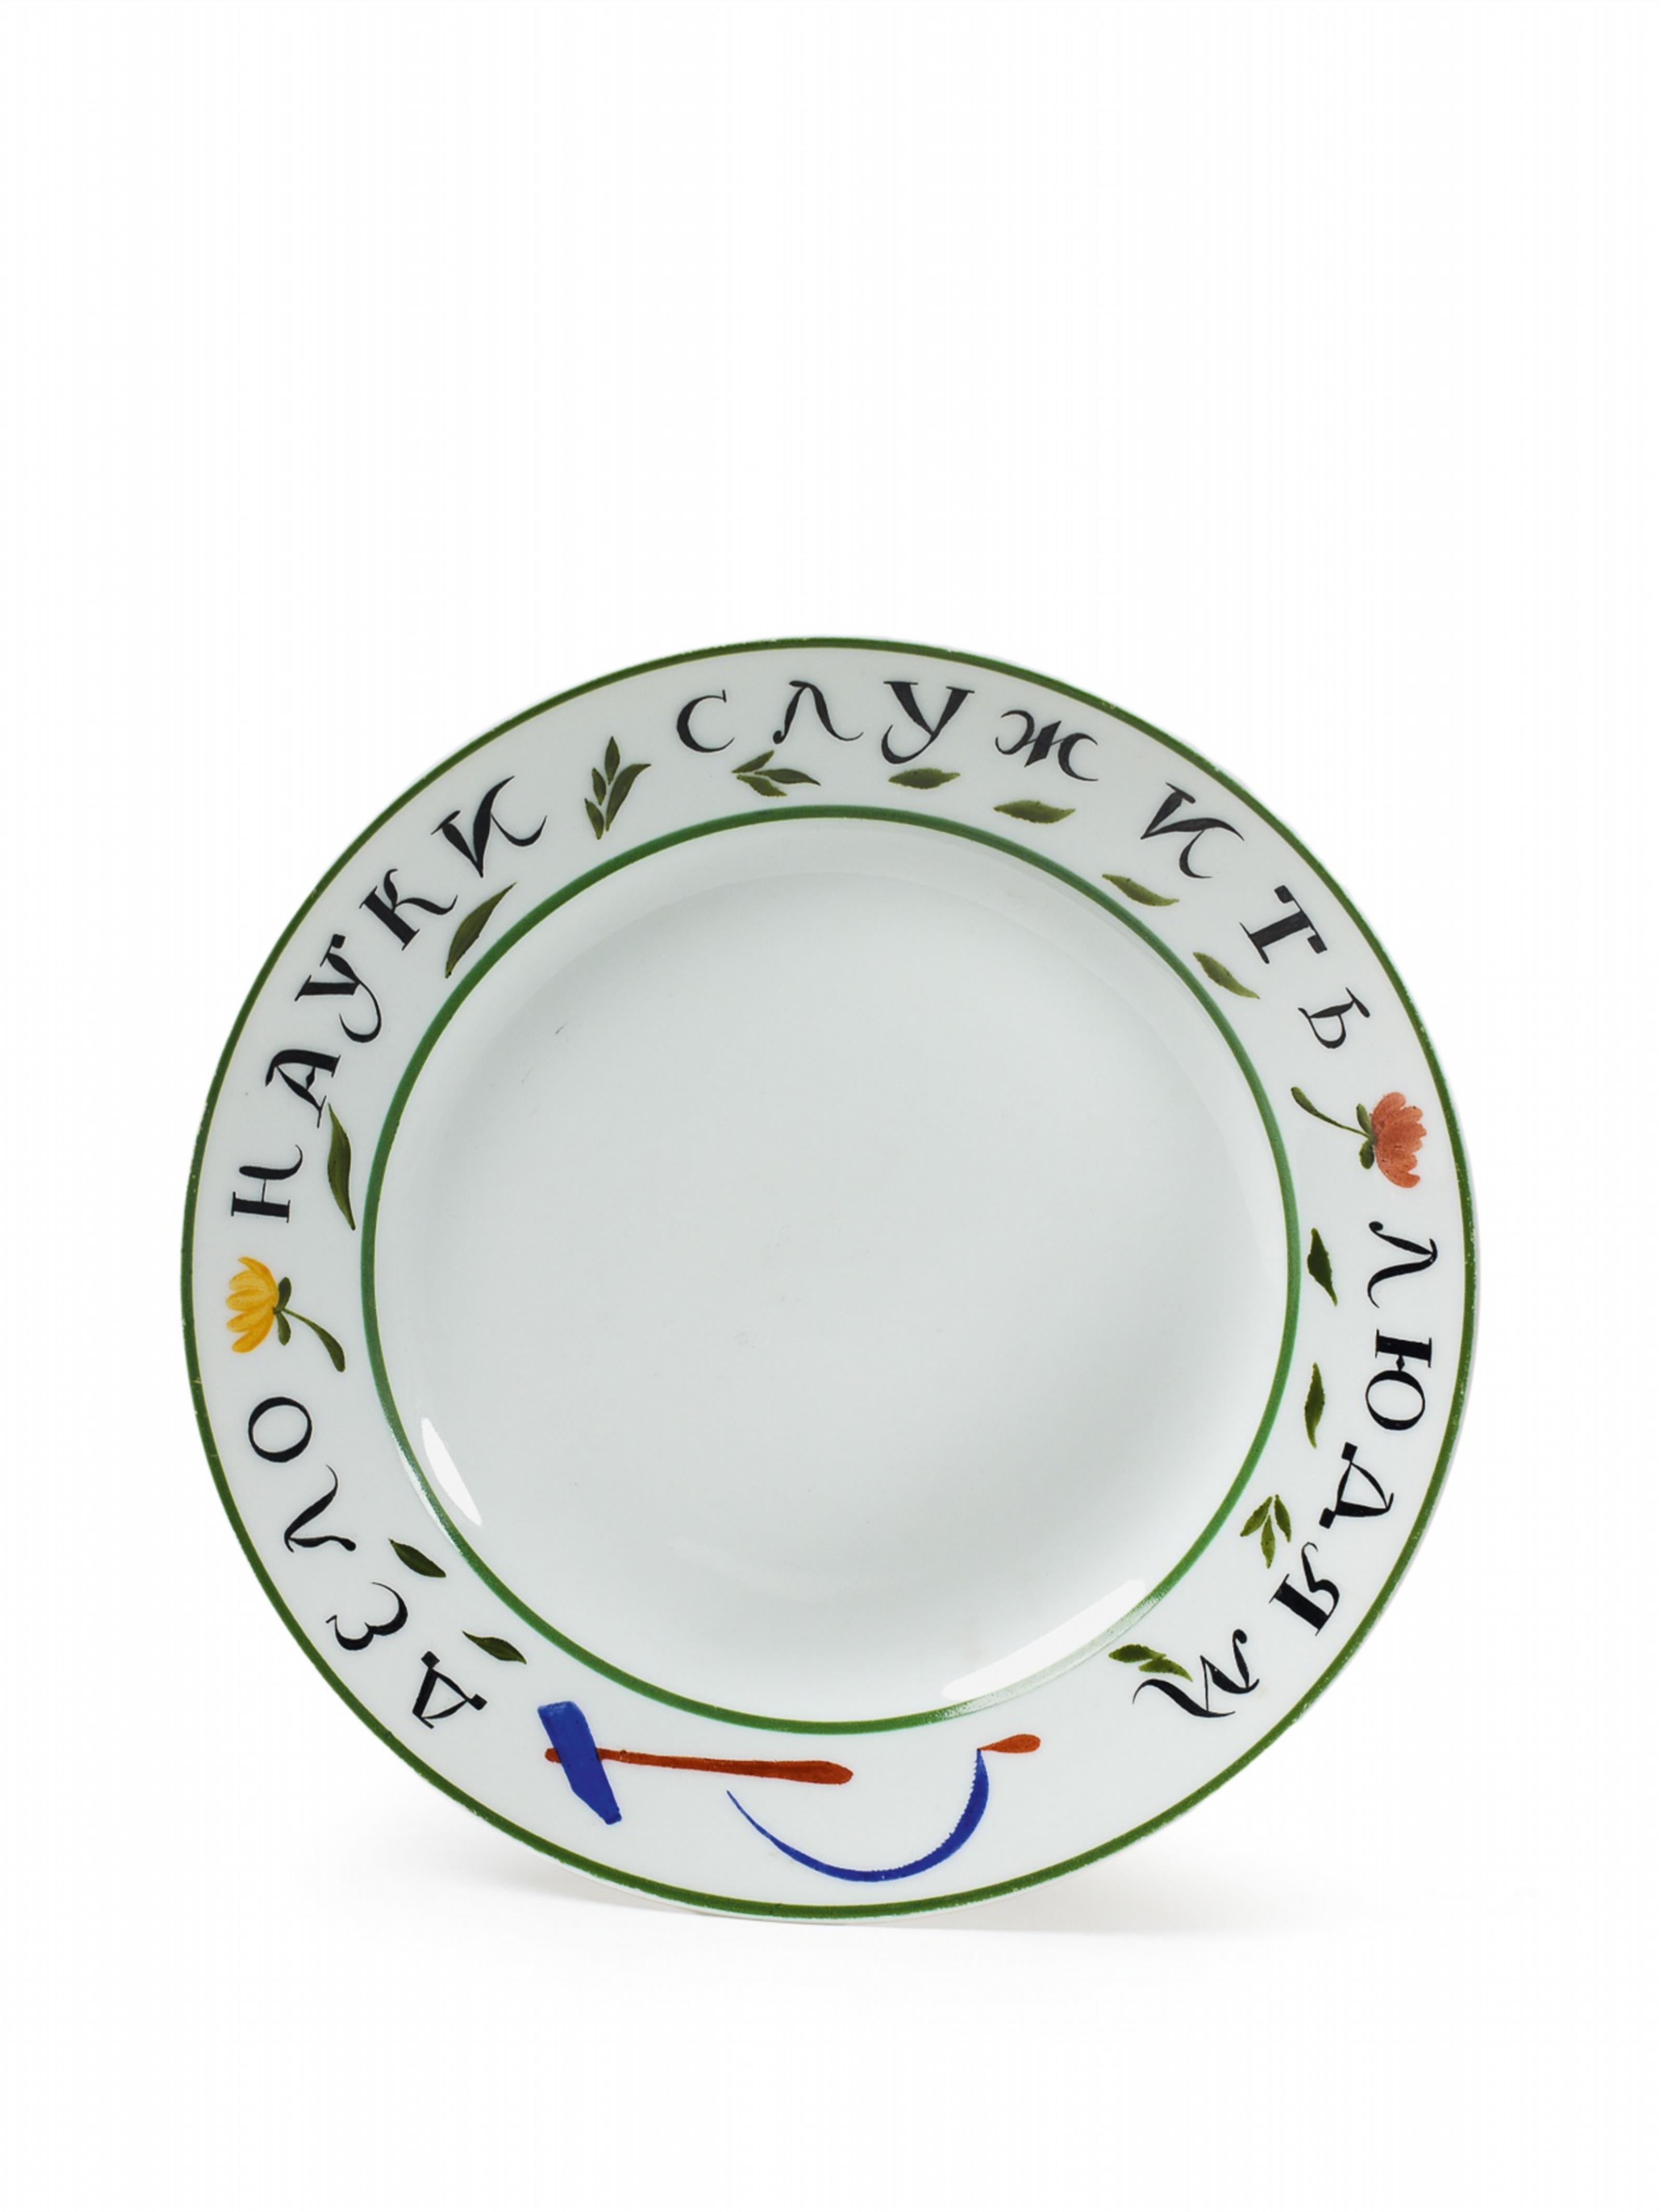 A porcelain plate with foliate and hammer and sickle decor in enamels, inscribed "The sciences belong to the people". - image-1